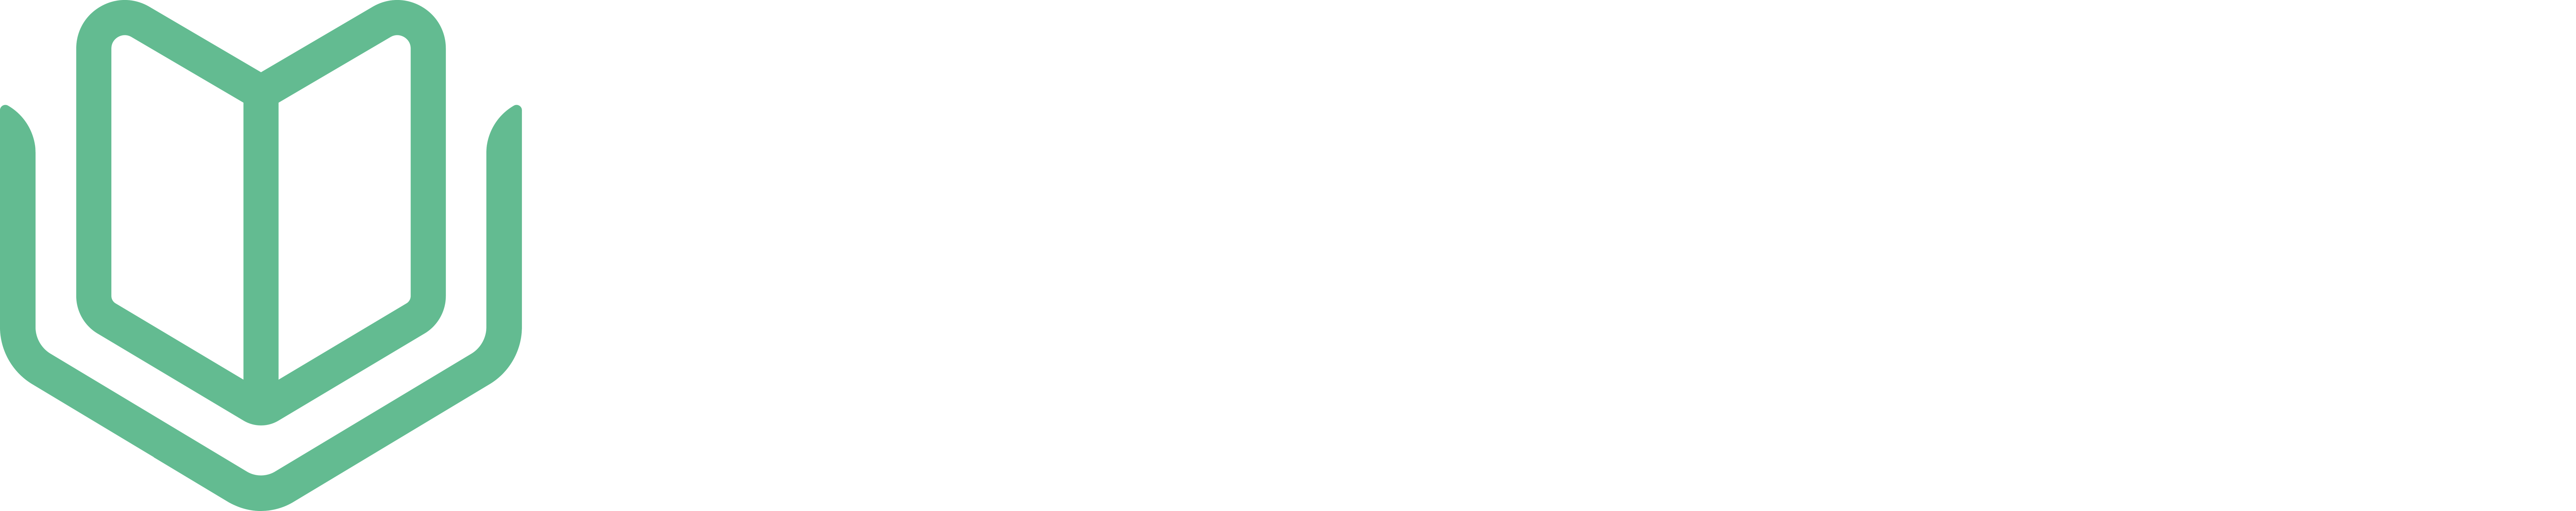 AccessAble - Your Accessibility Guide